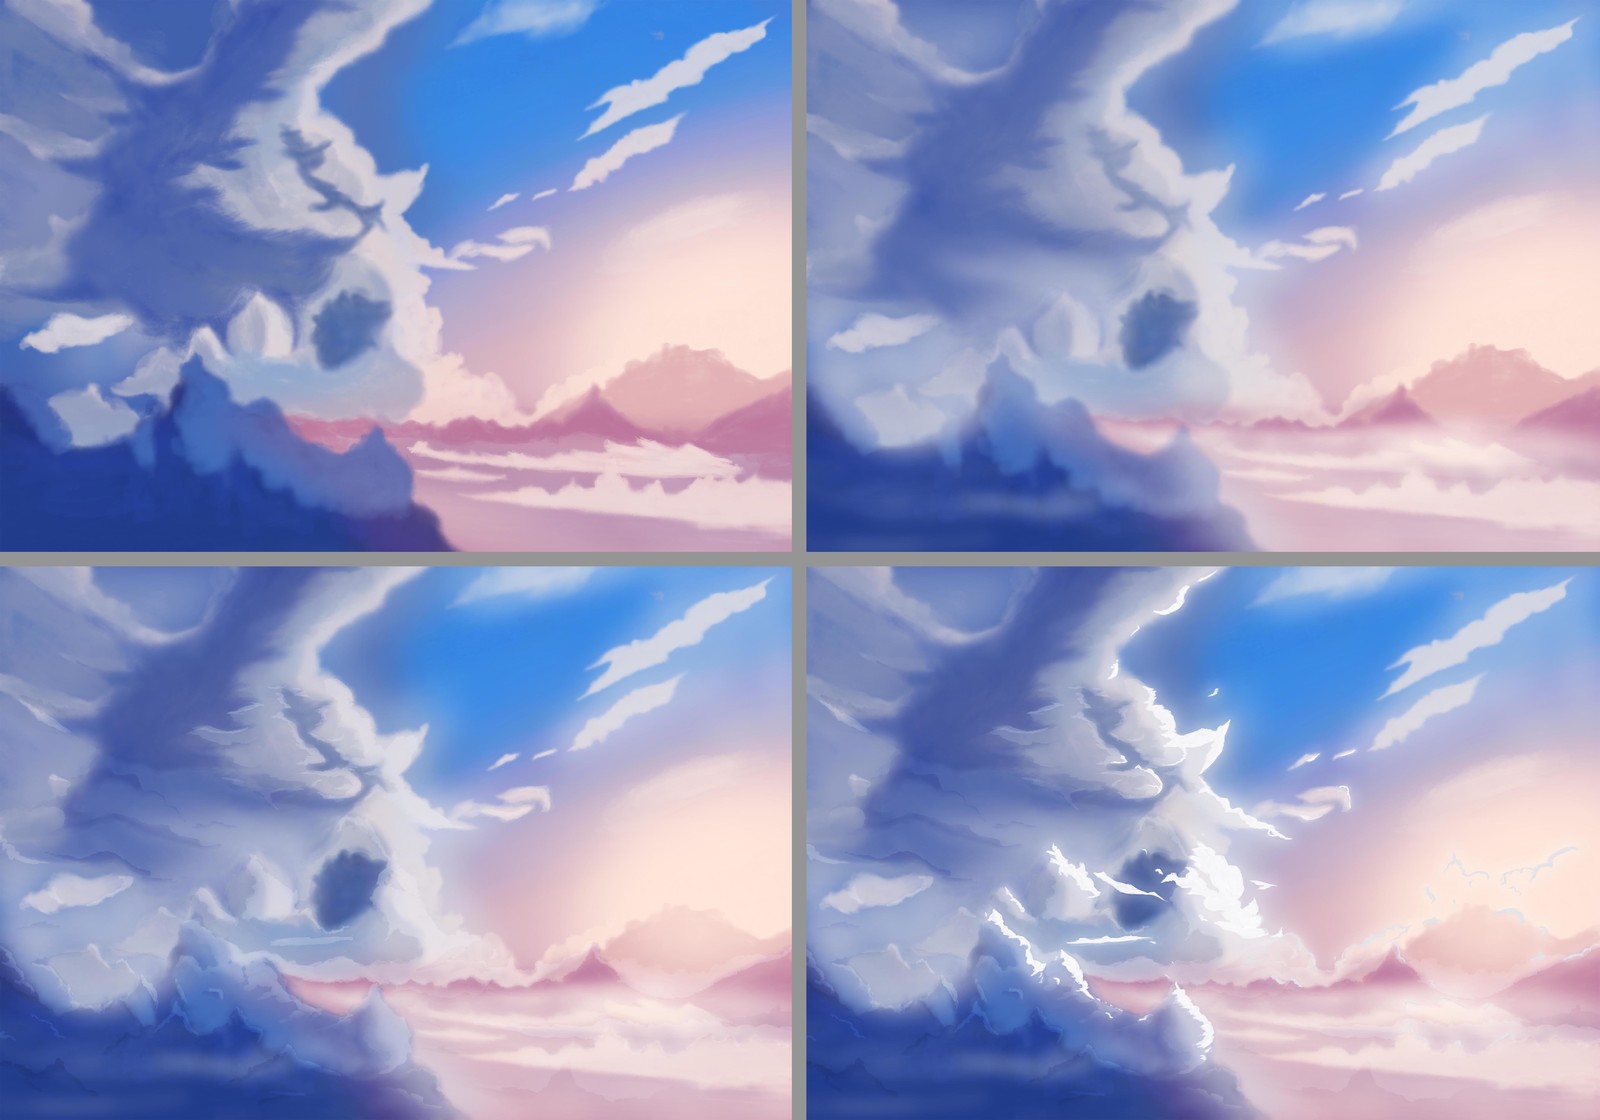 Cloud formation process using Adobe Photoshop. 